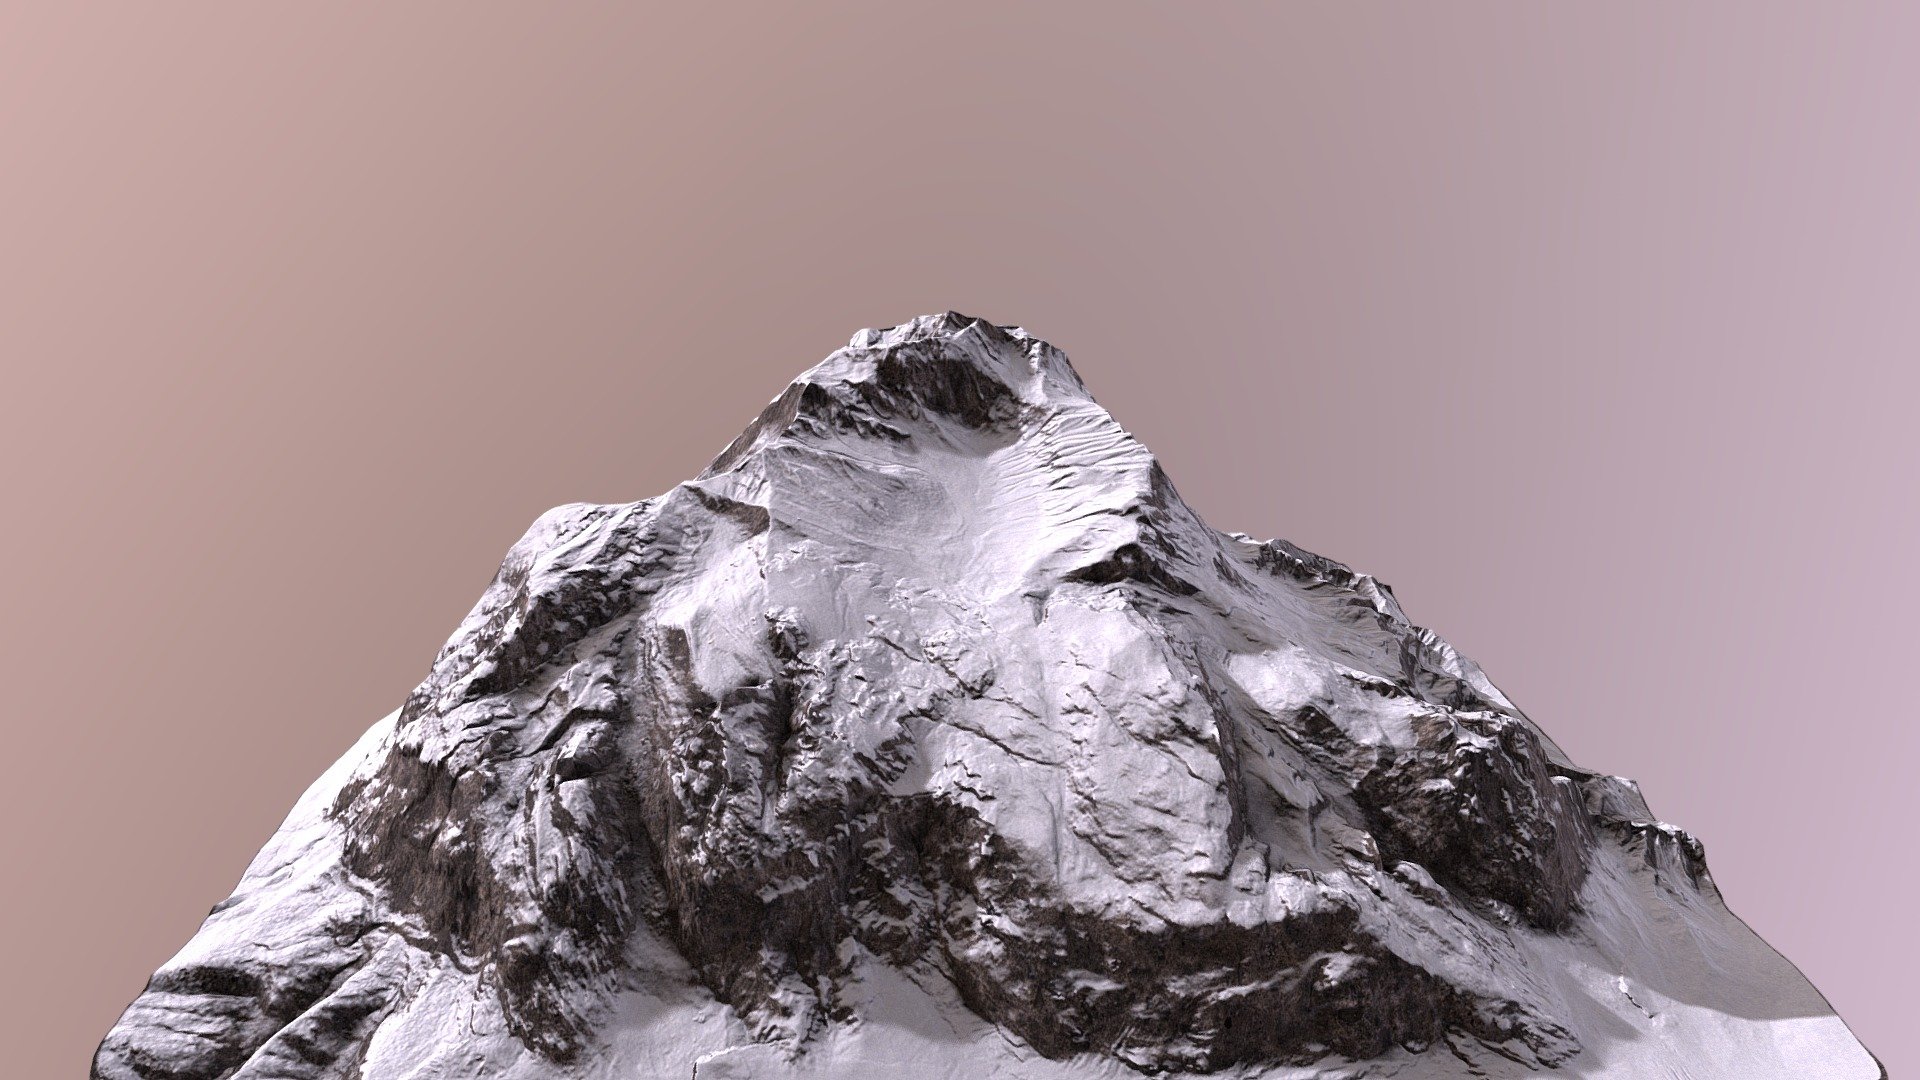 making mountains in zbrush